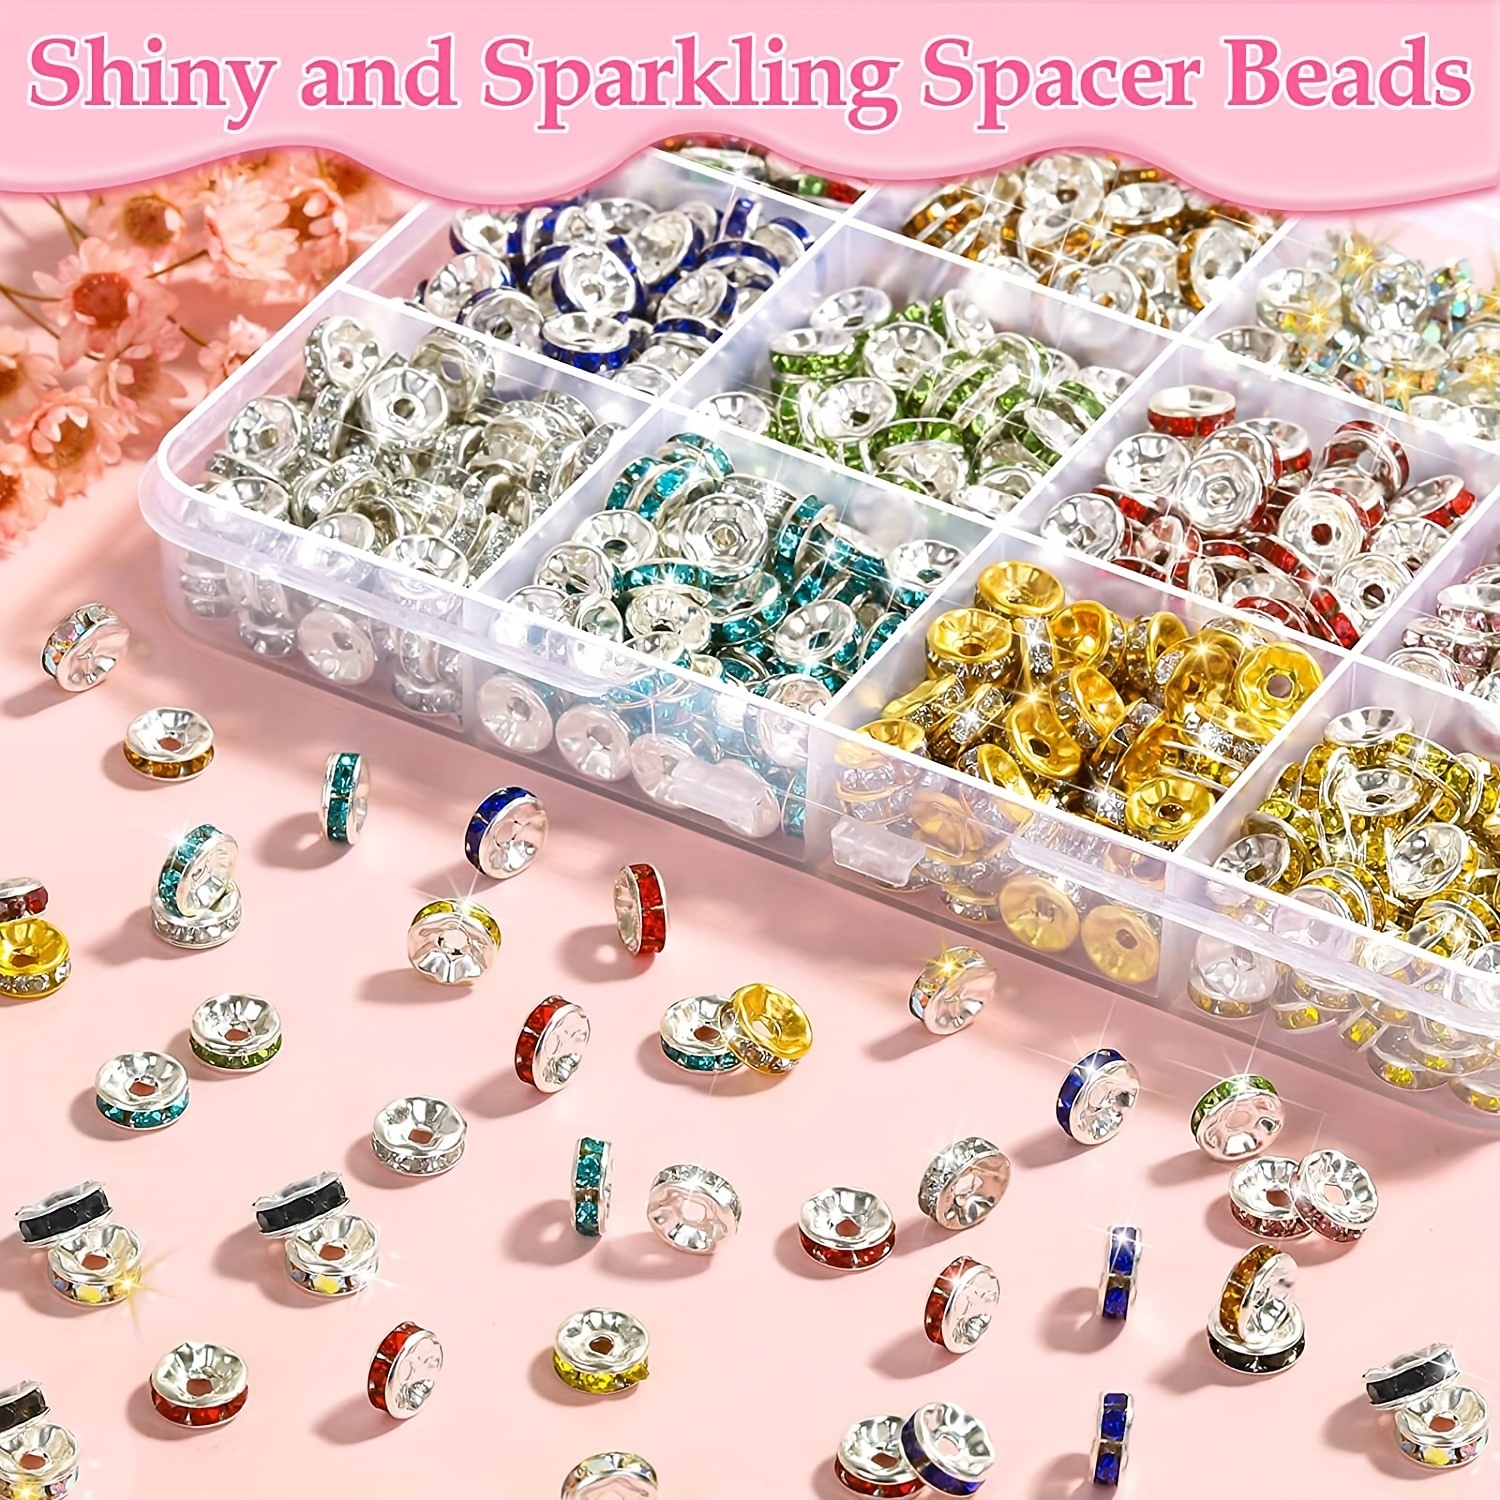 1 Set Spacer Beads for Jewelry Making, 8mm Rhinestone Spacer Beads Crystal  Bead Spacers for Bracelets, Focal Beads for Pen, 15 Colors